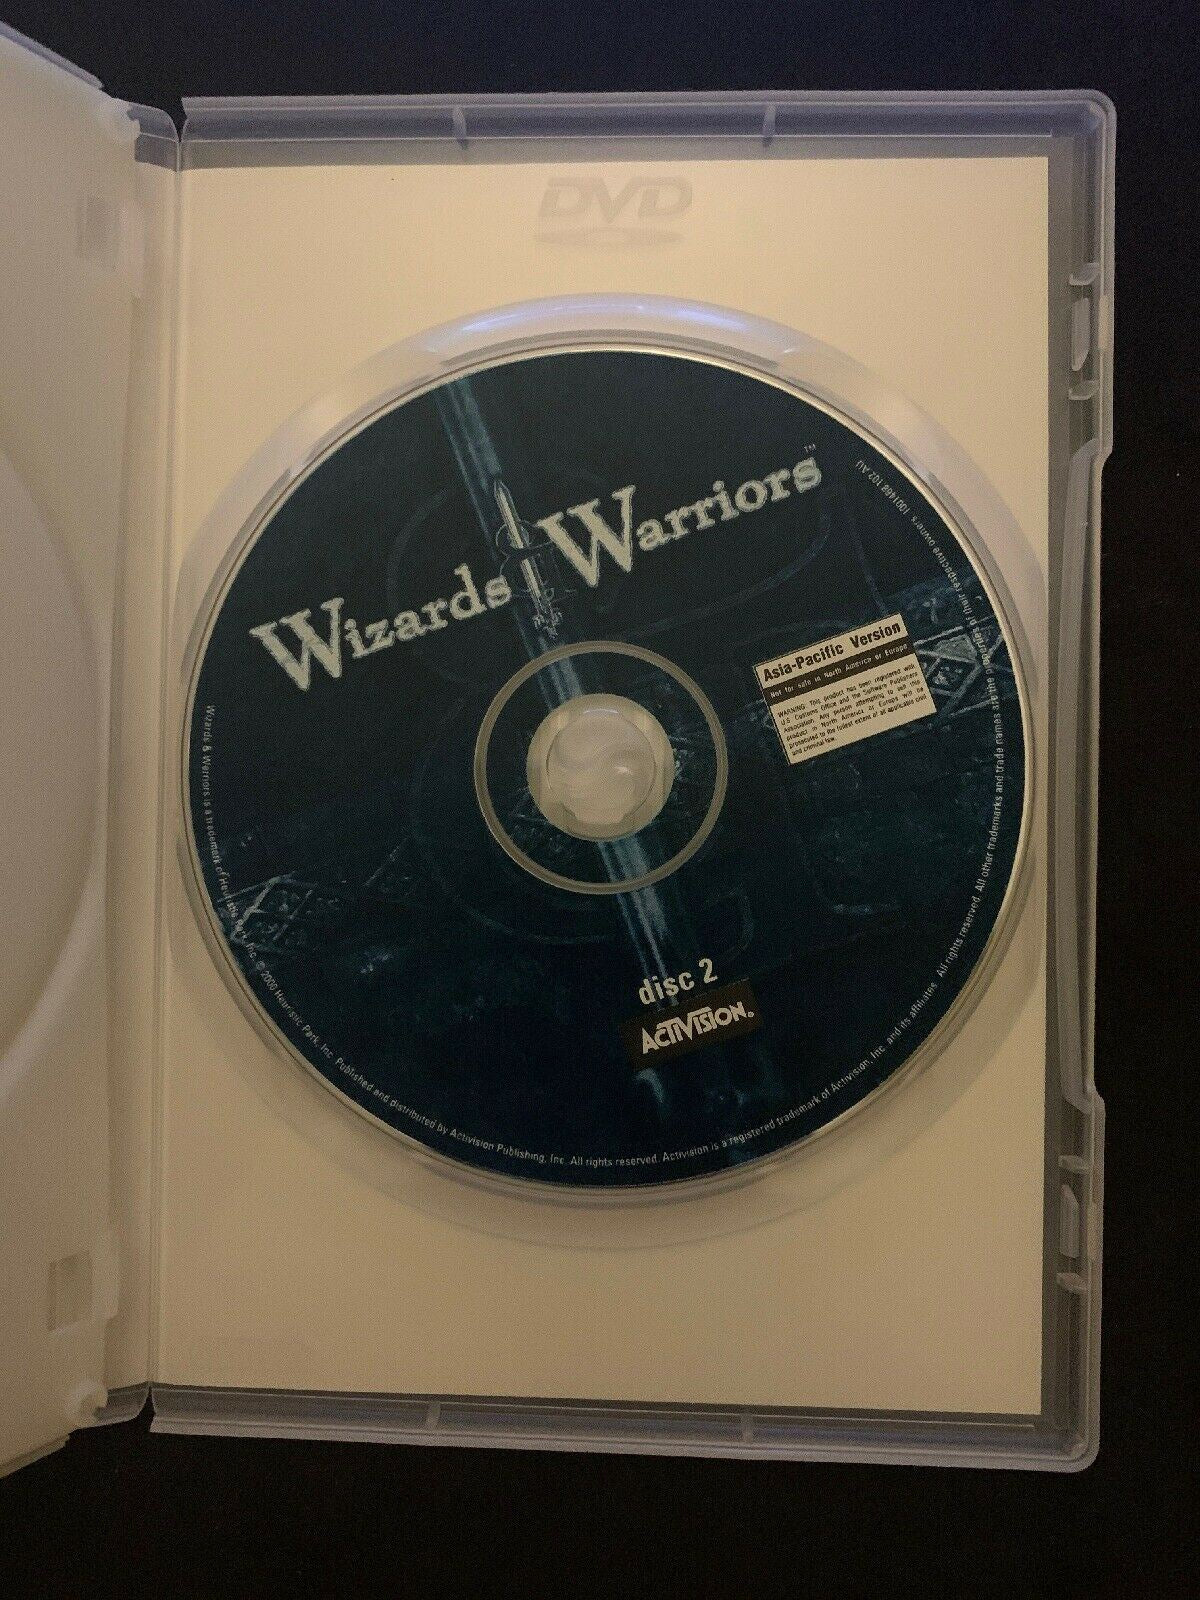 Wizards & Warriors for PC CD-Rom Classic RPG Windows Game